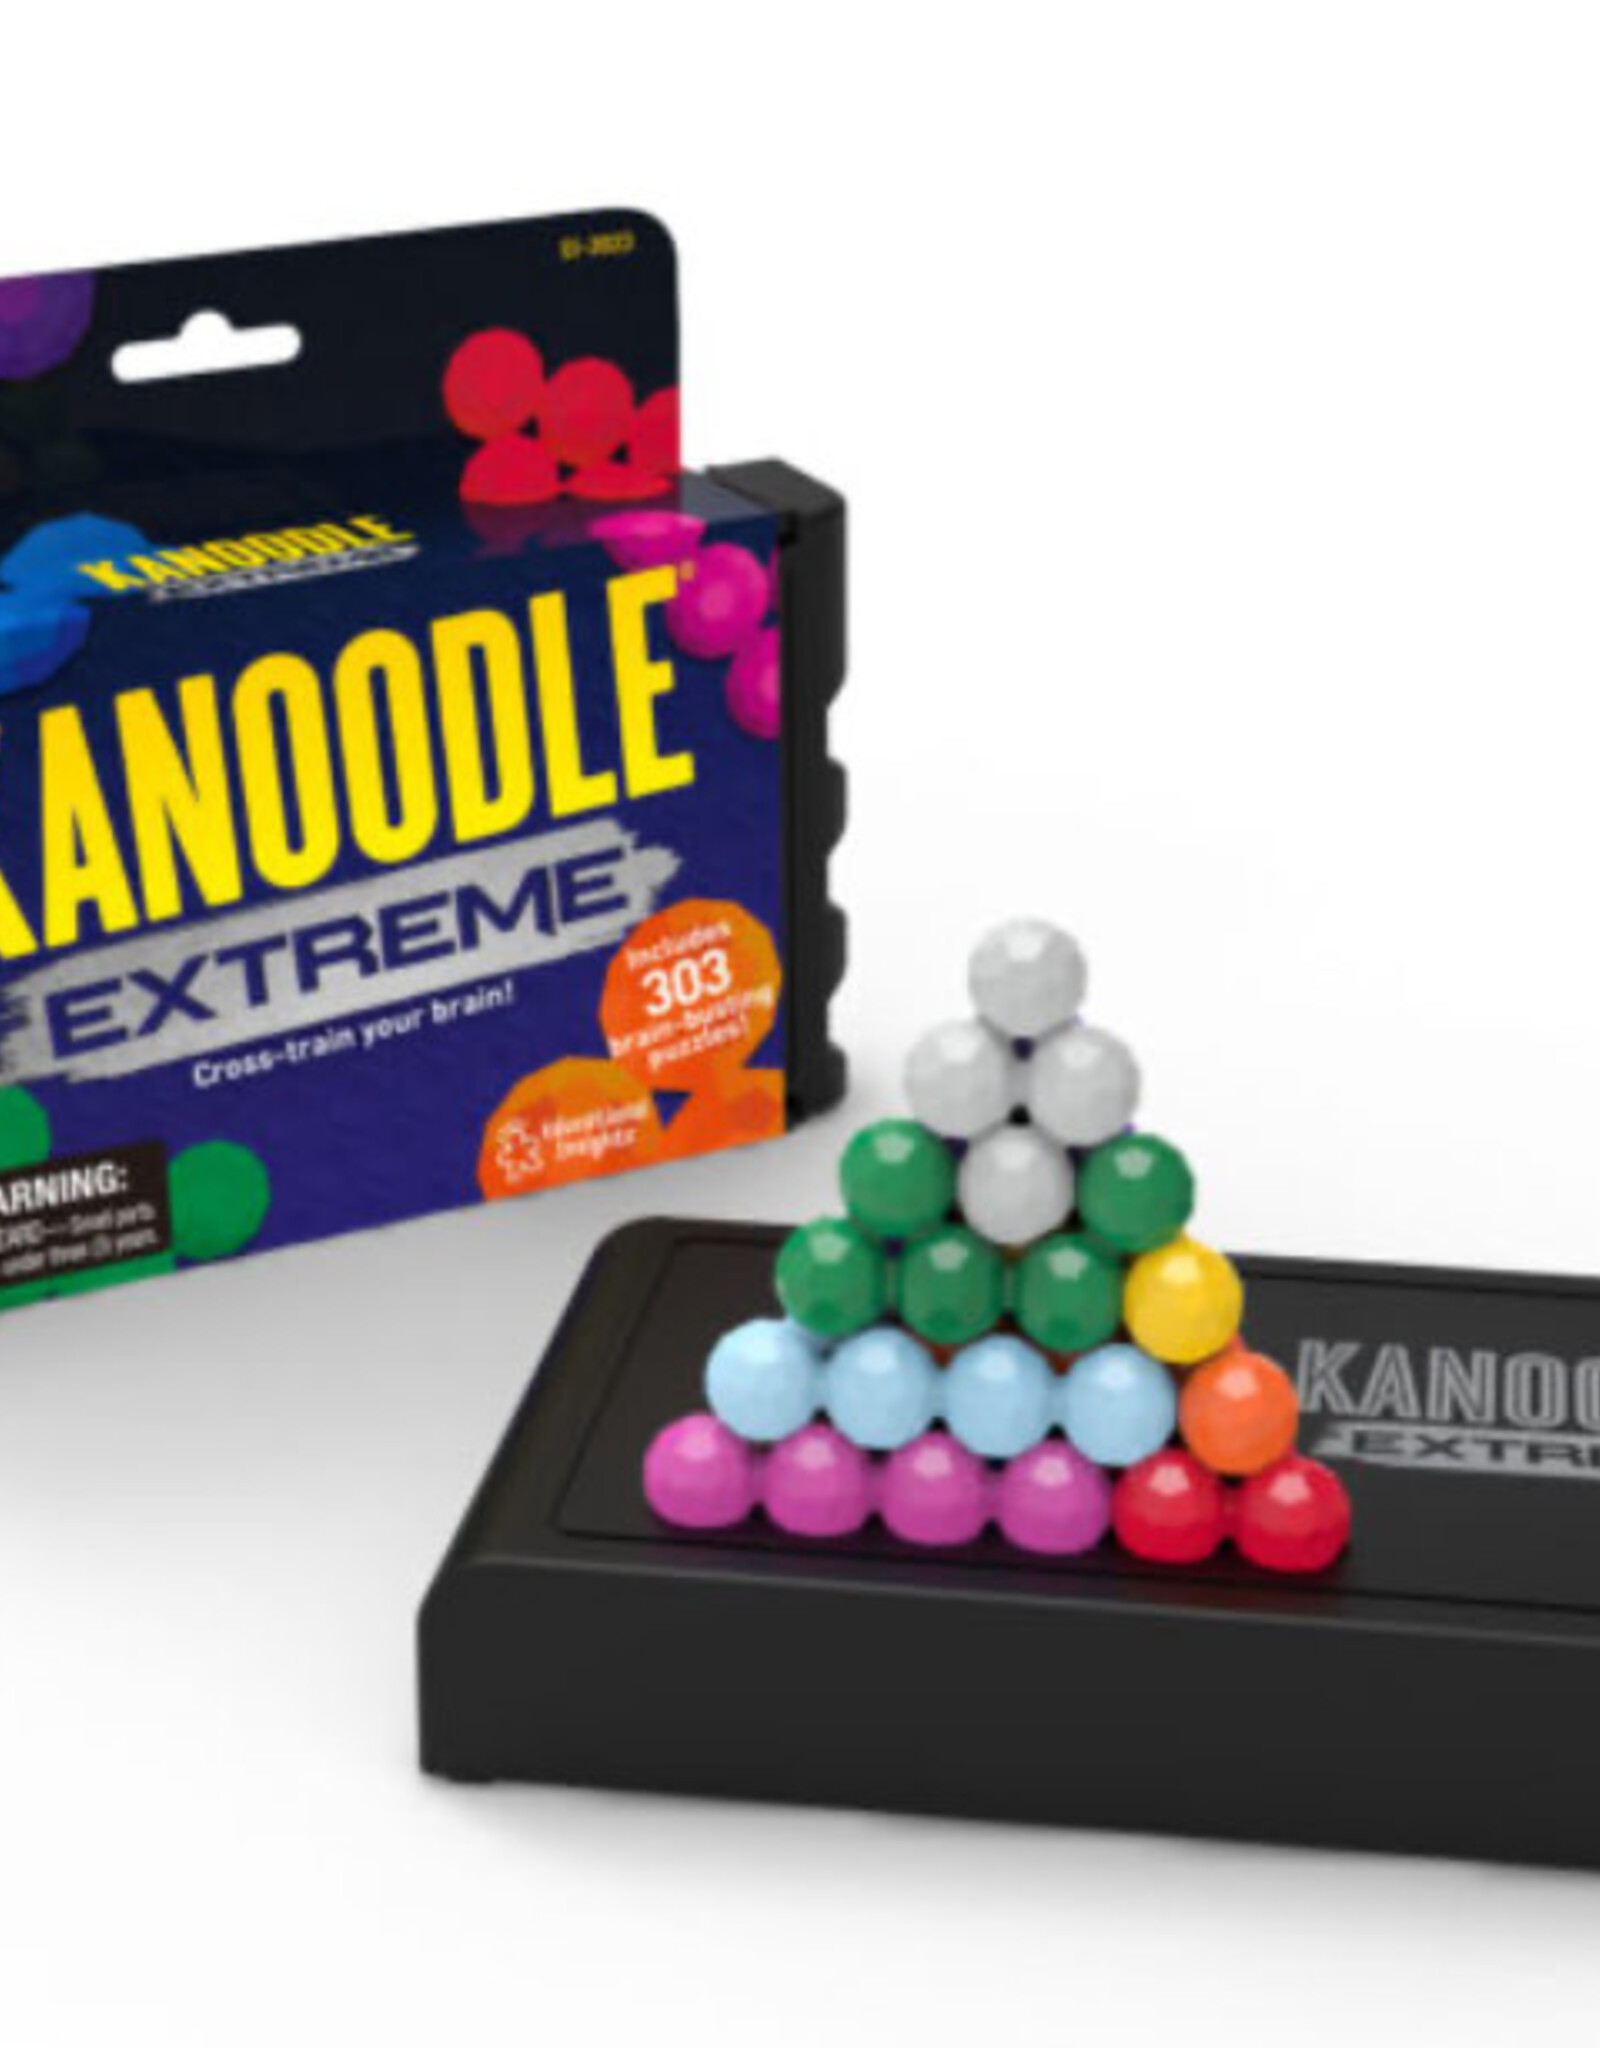 KANOODLE EXTREME Brain Training Game, Video published by Friend